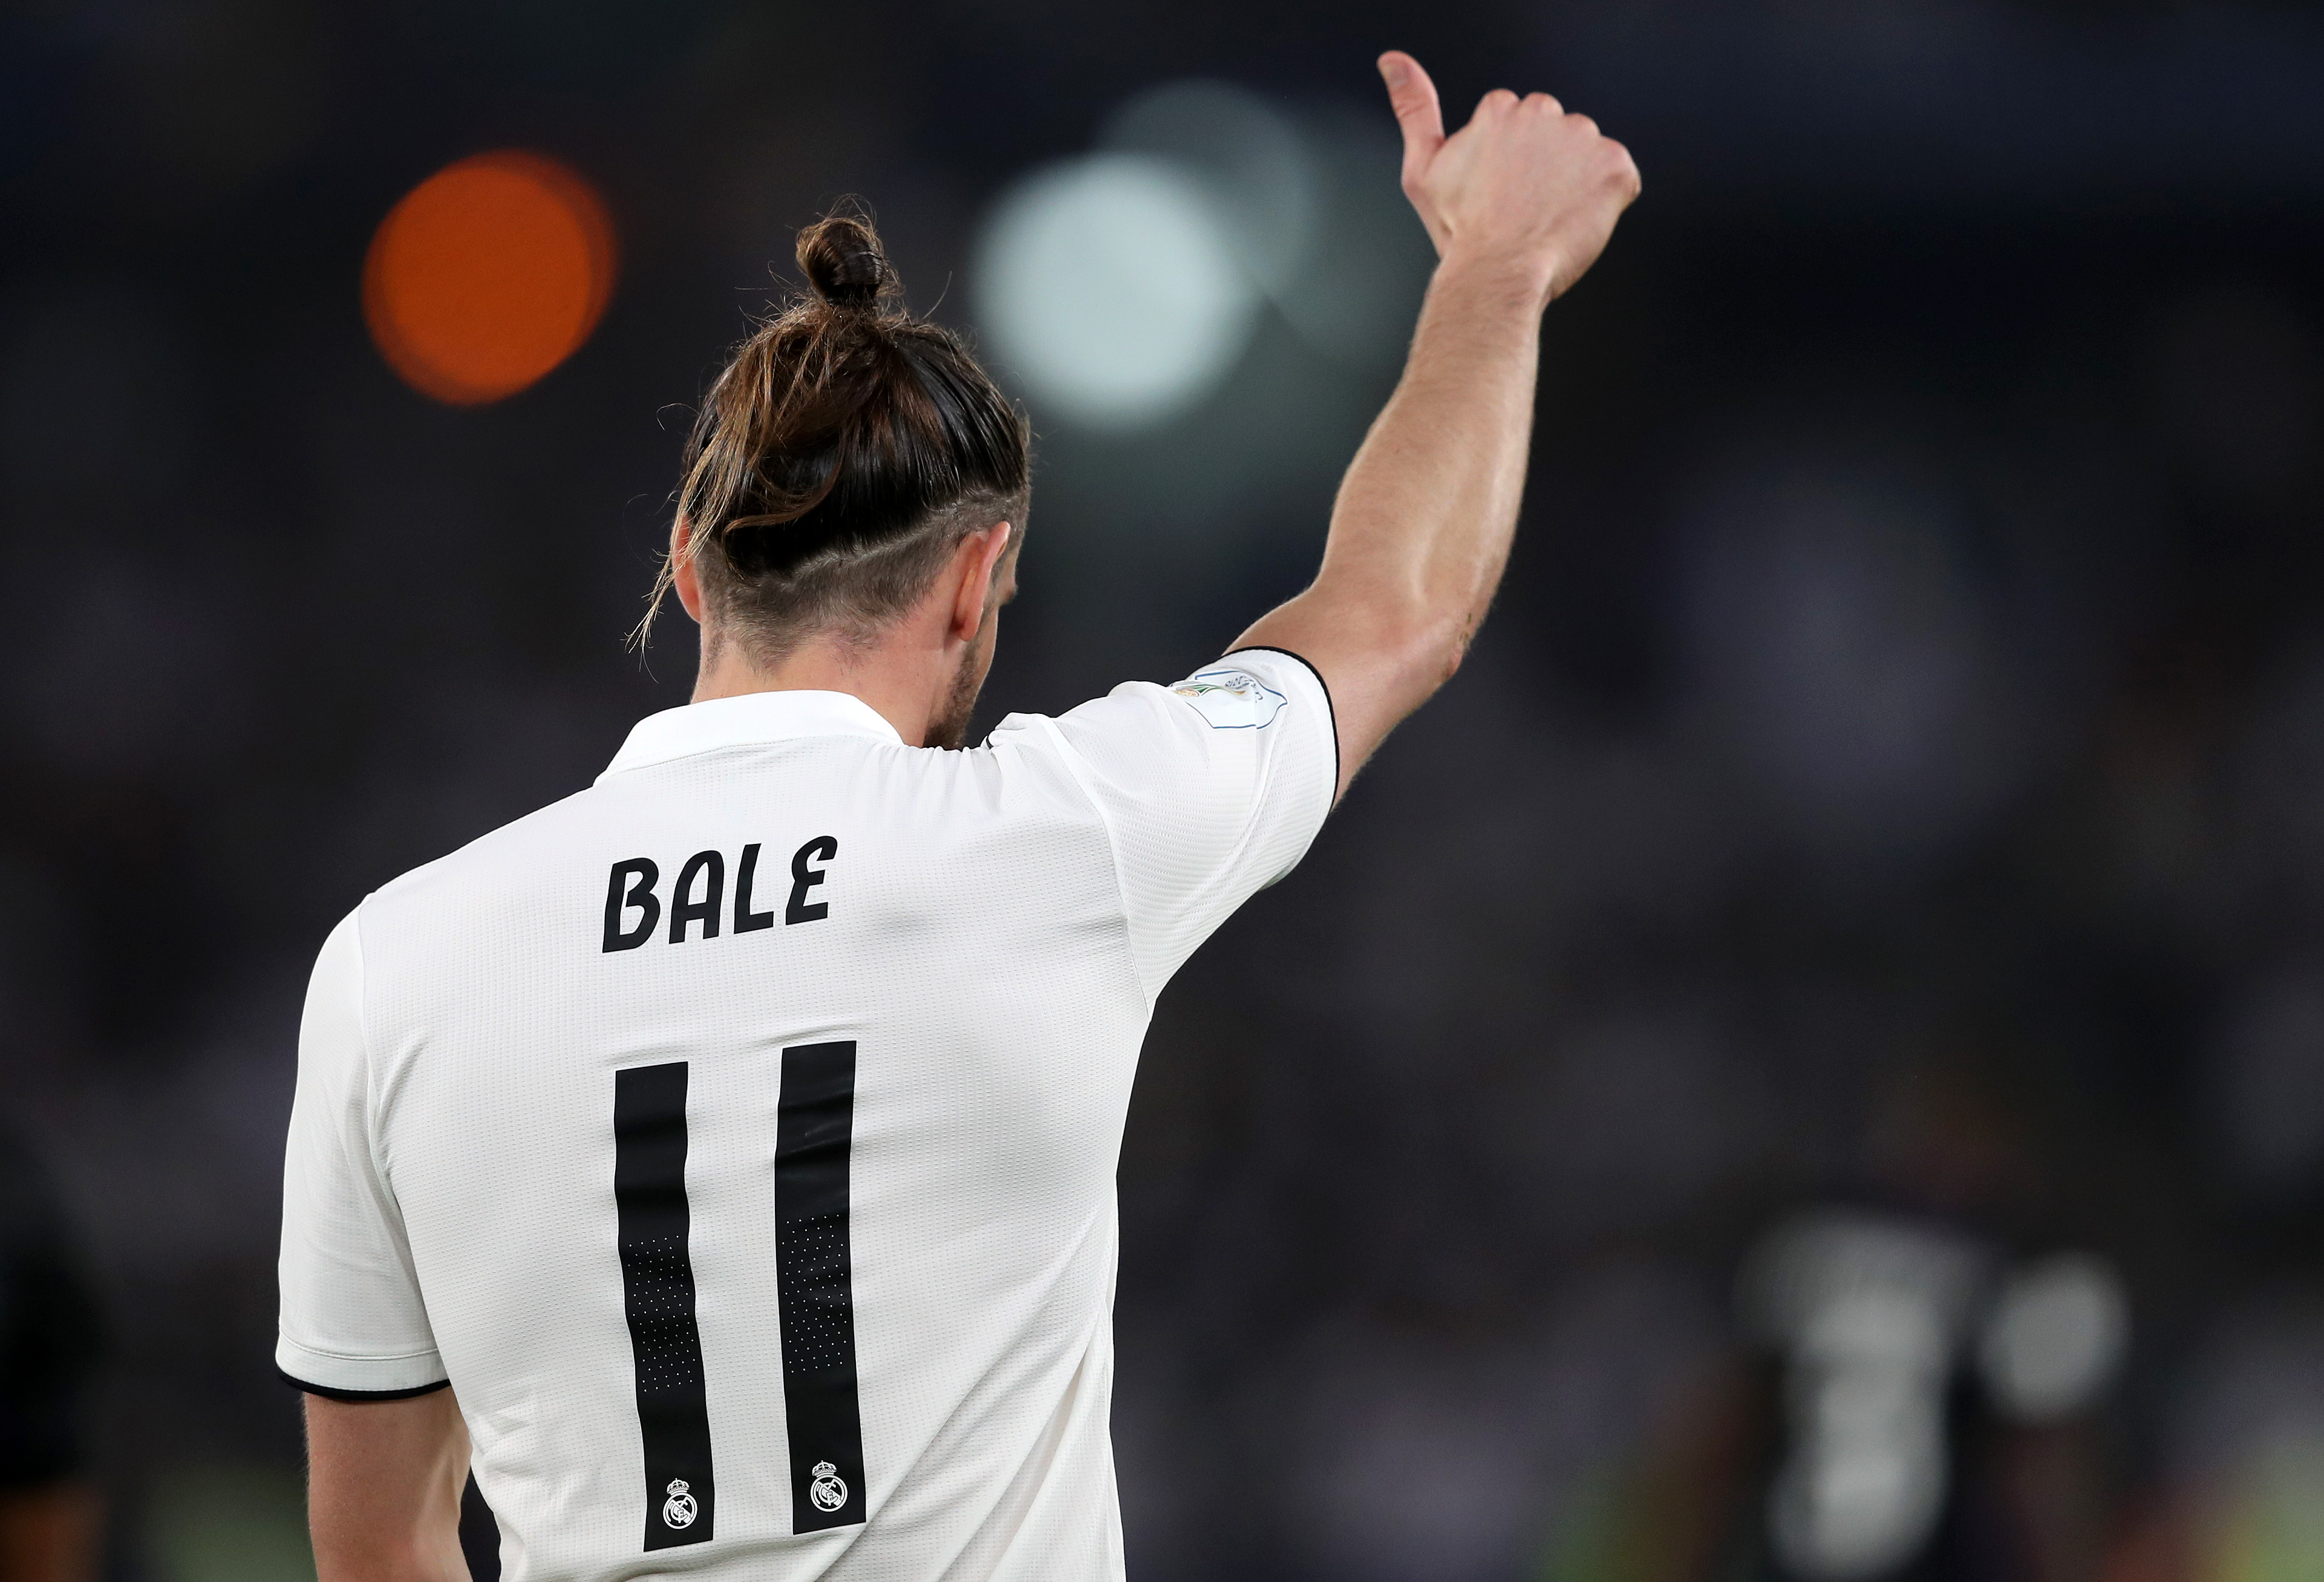 Pires wants Arsenal to sign Bale (Photo by Francois Nel/Getty Images)